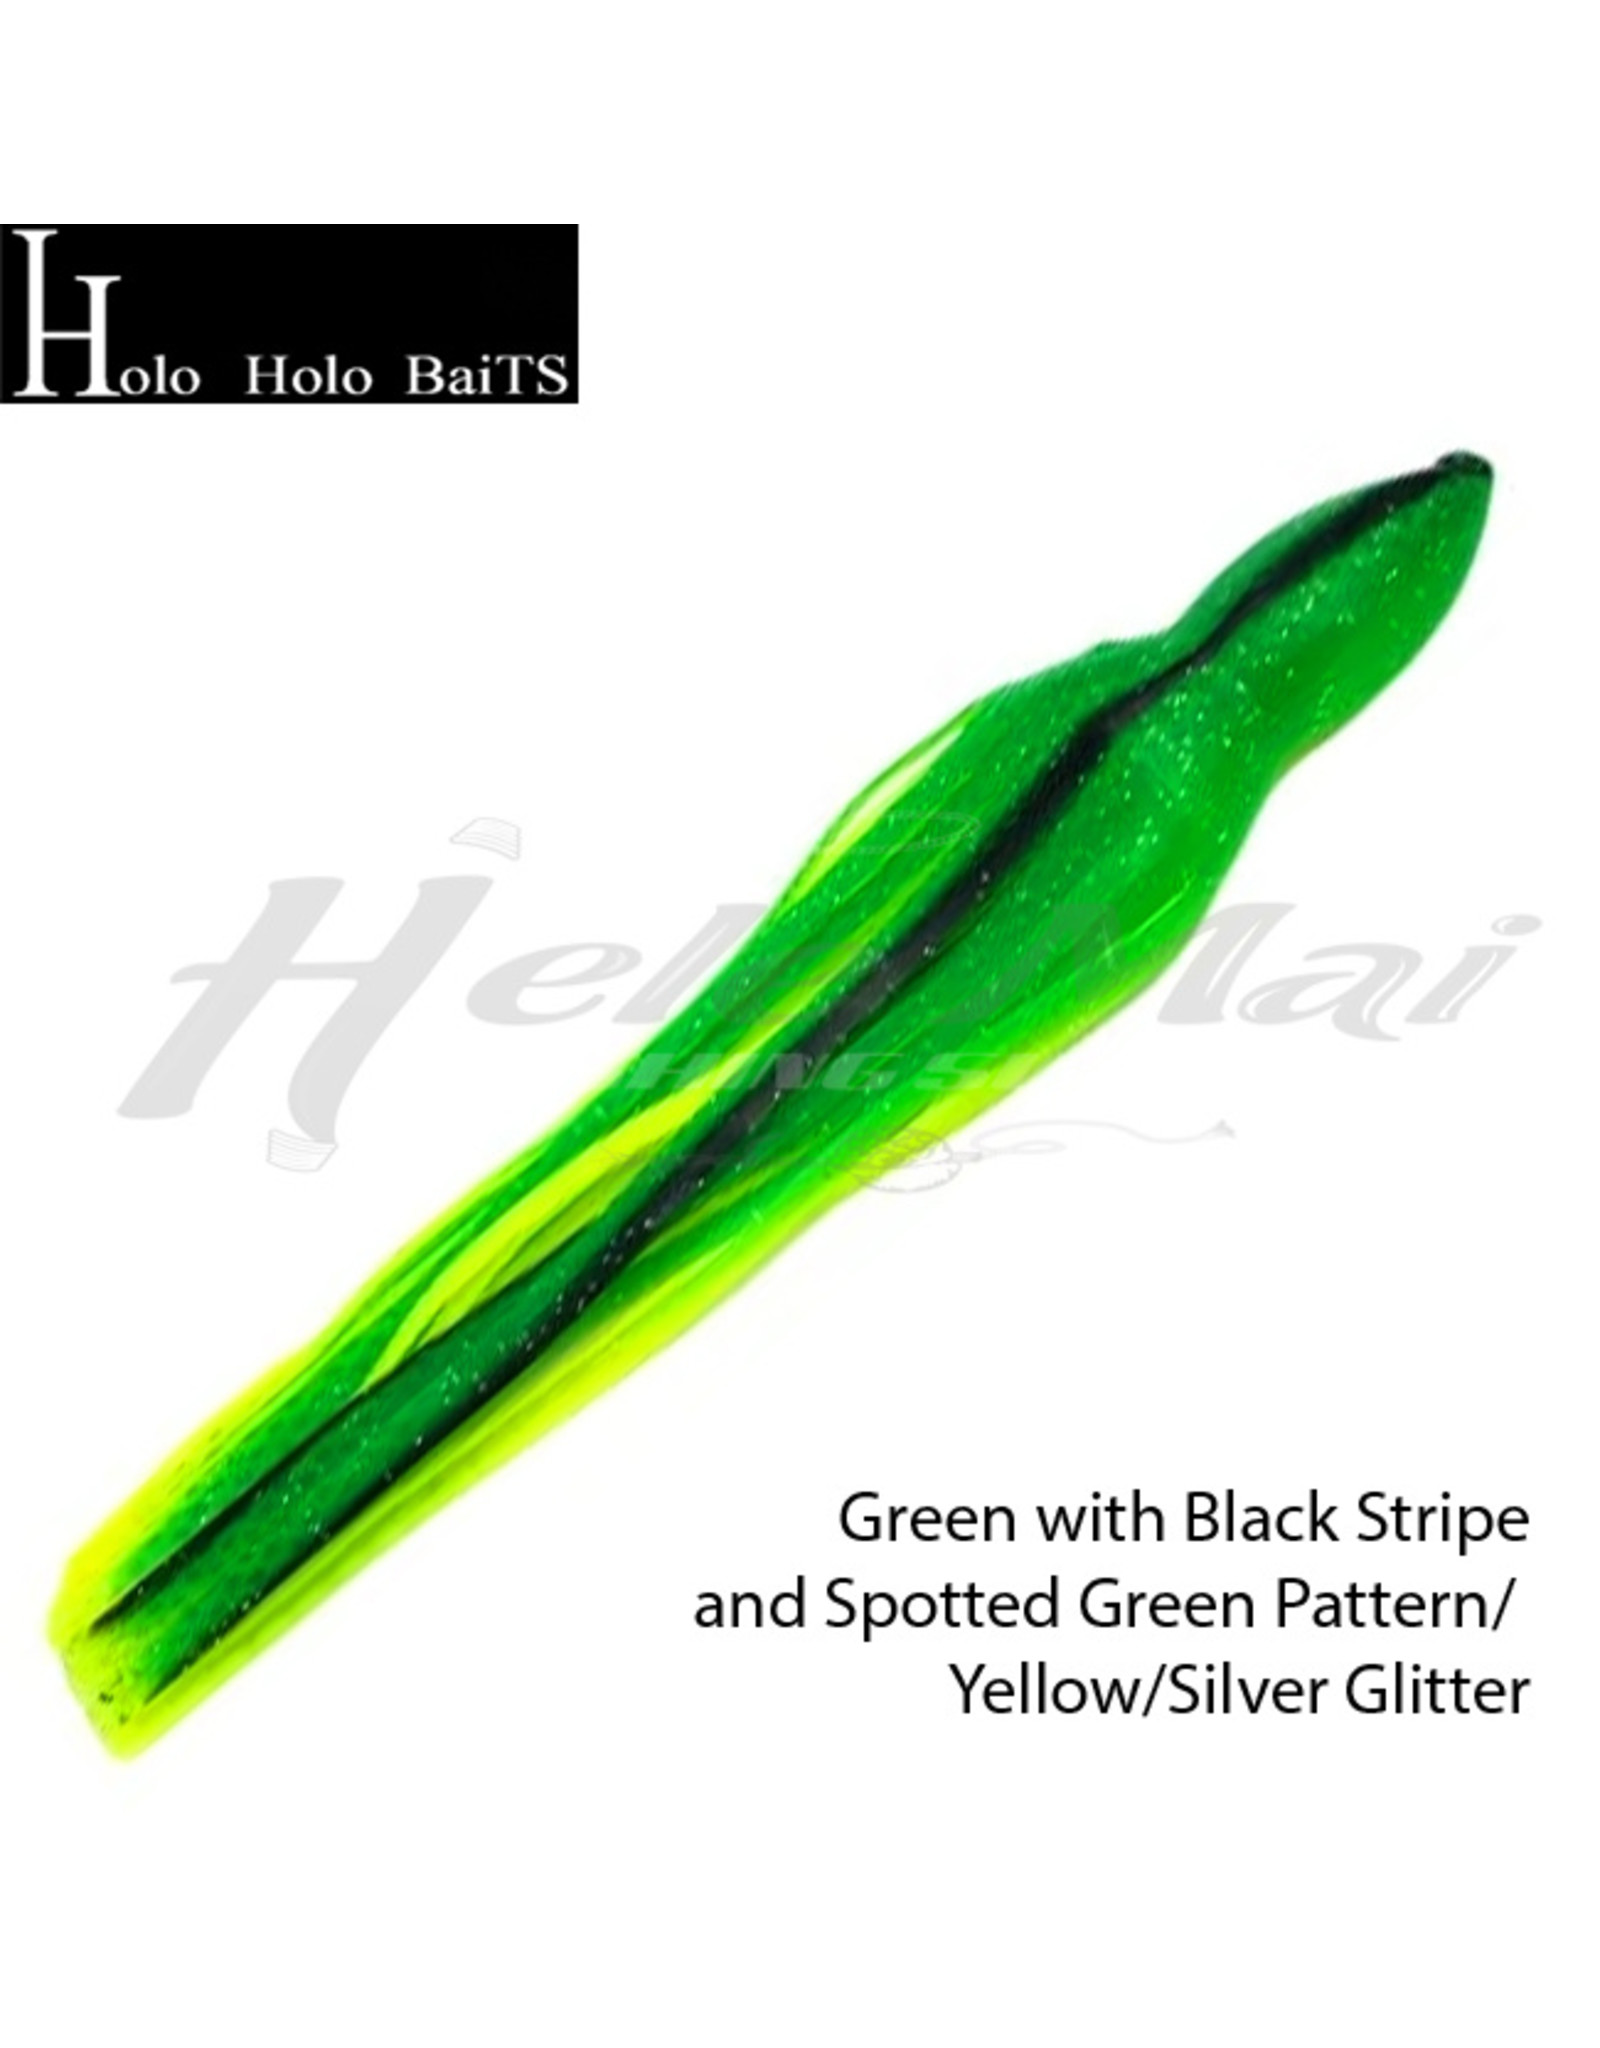 HOLO HOLO HH, 7" SQUID SKIRT FROG GREEN YELLOW 0099